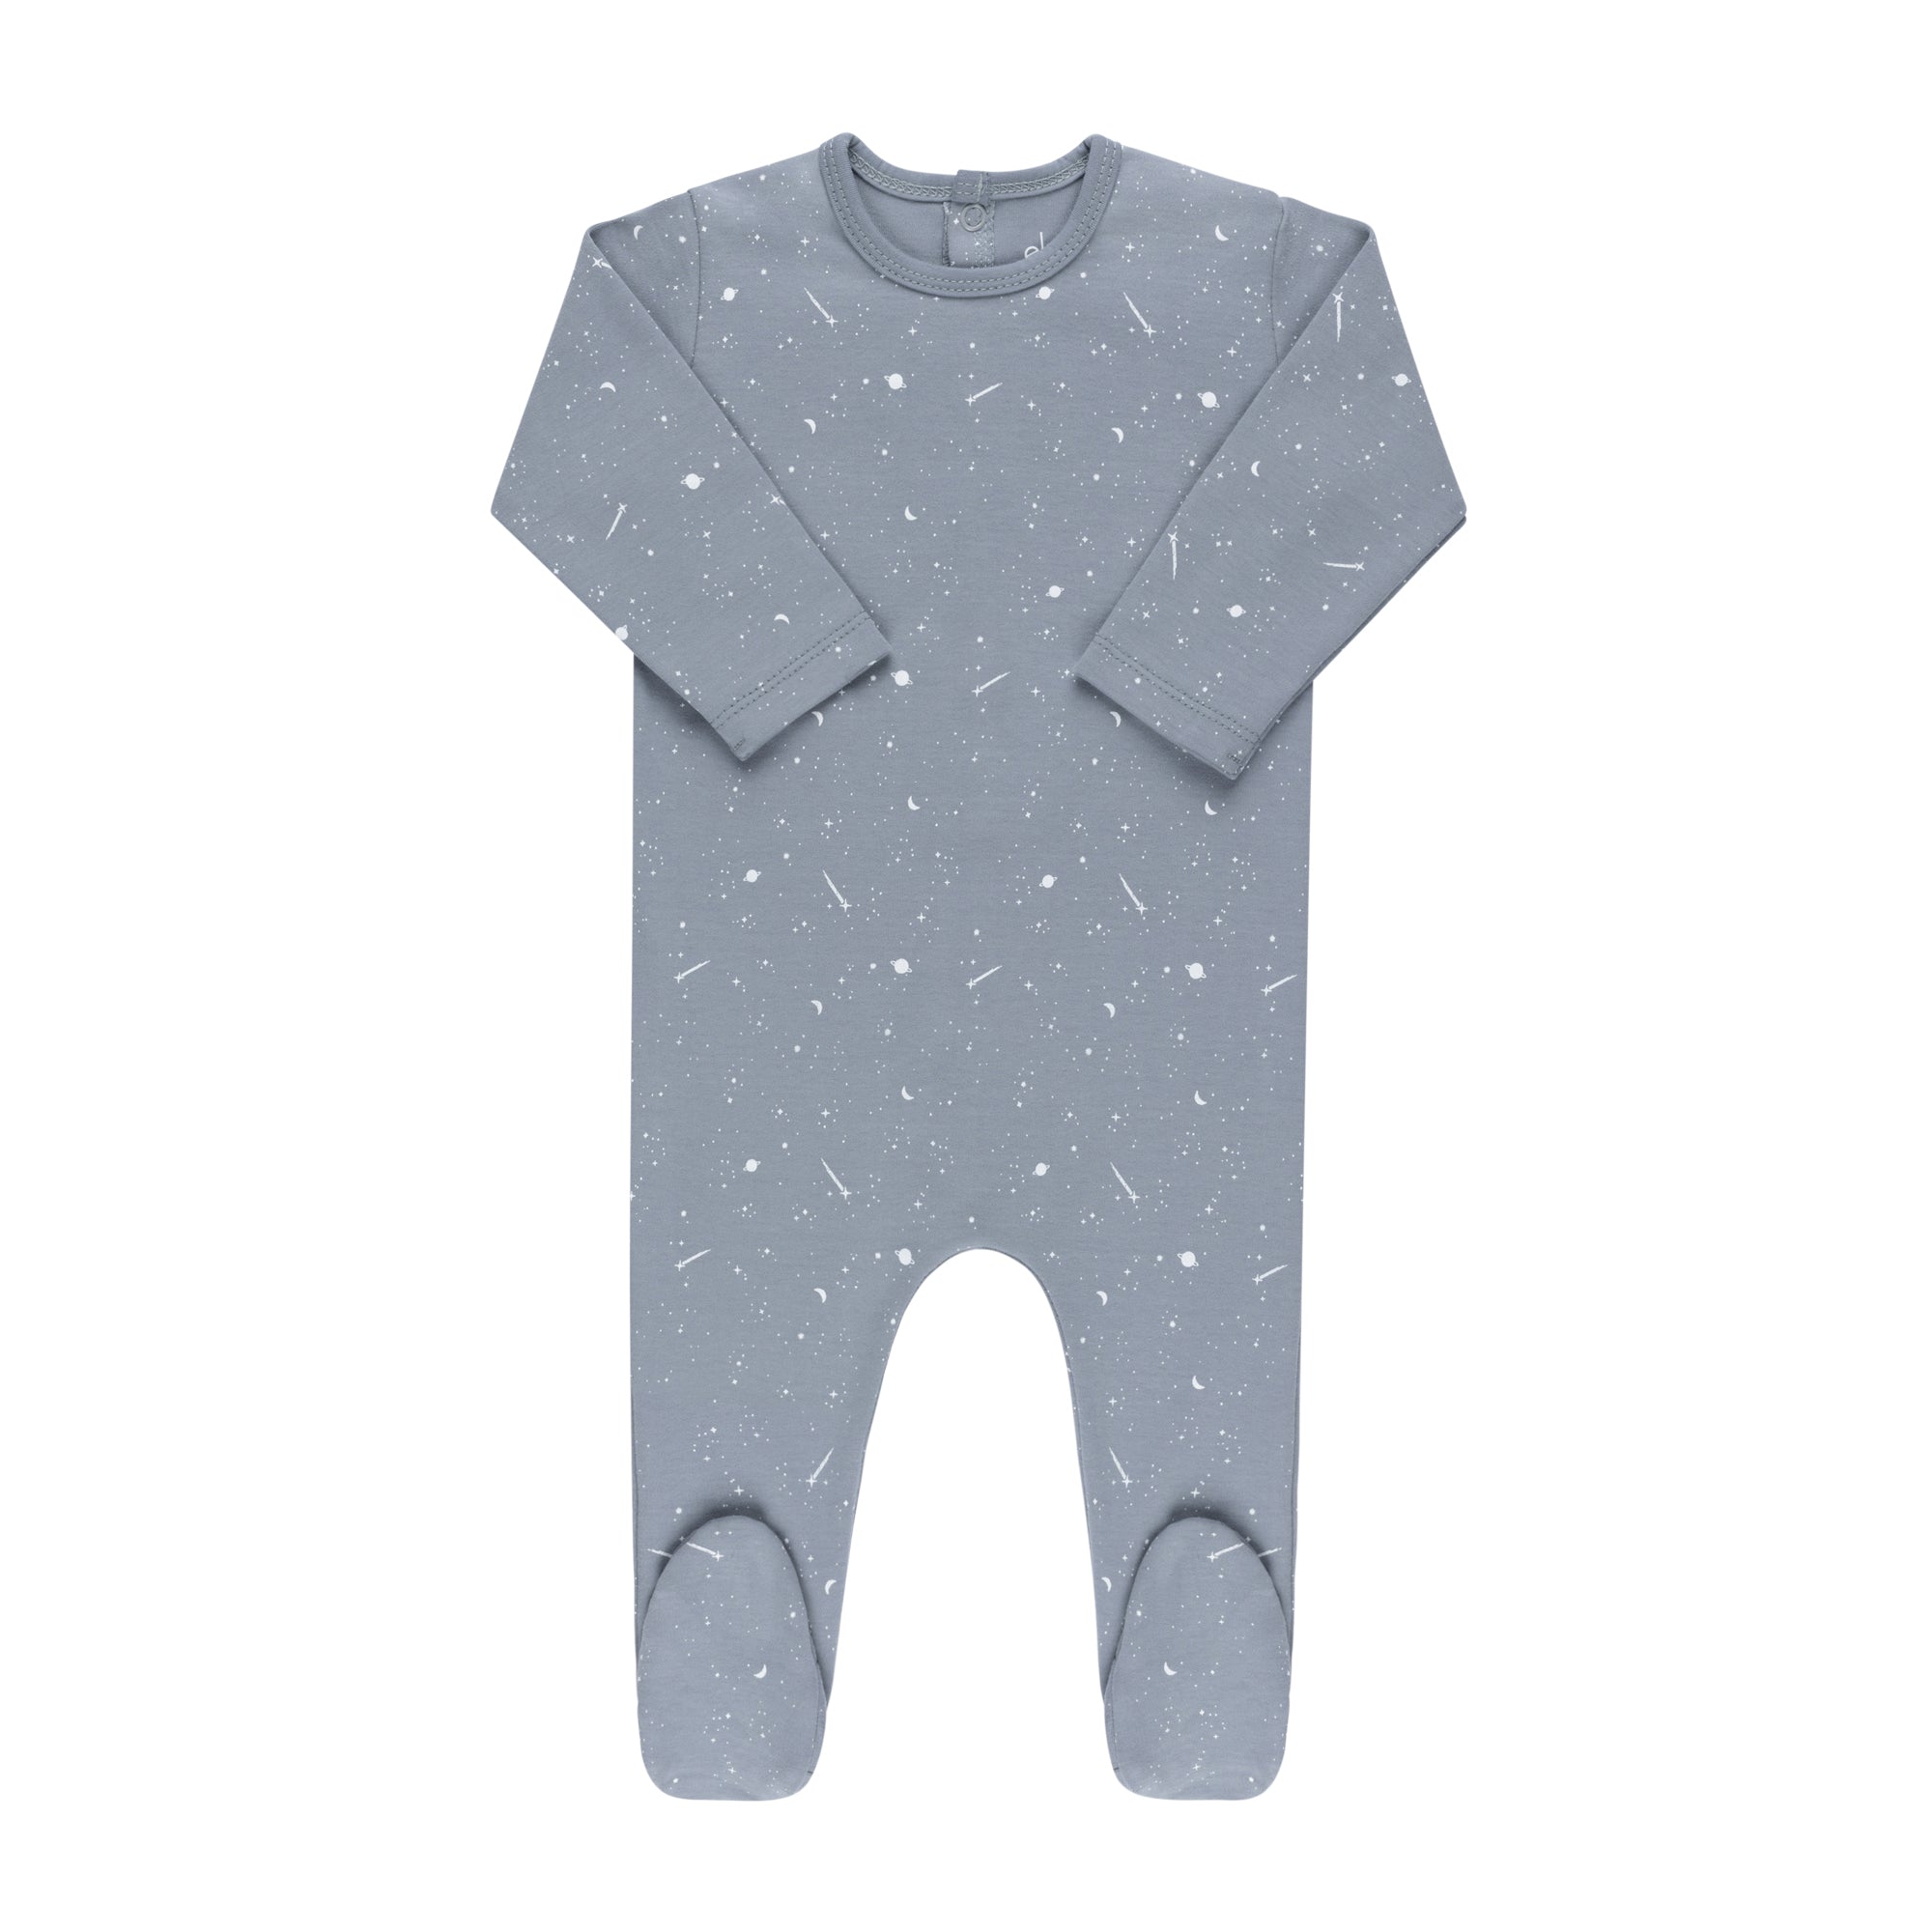 Brushed Cotton - Celestial Collection - Footies